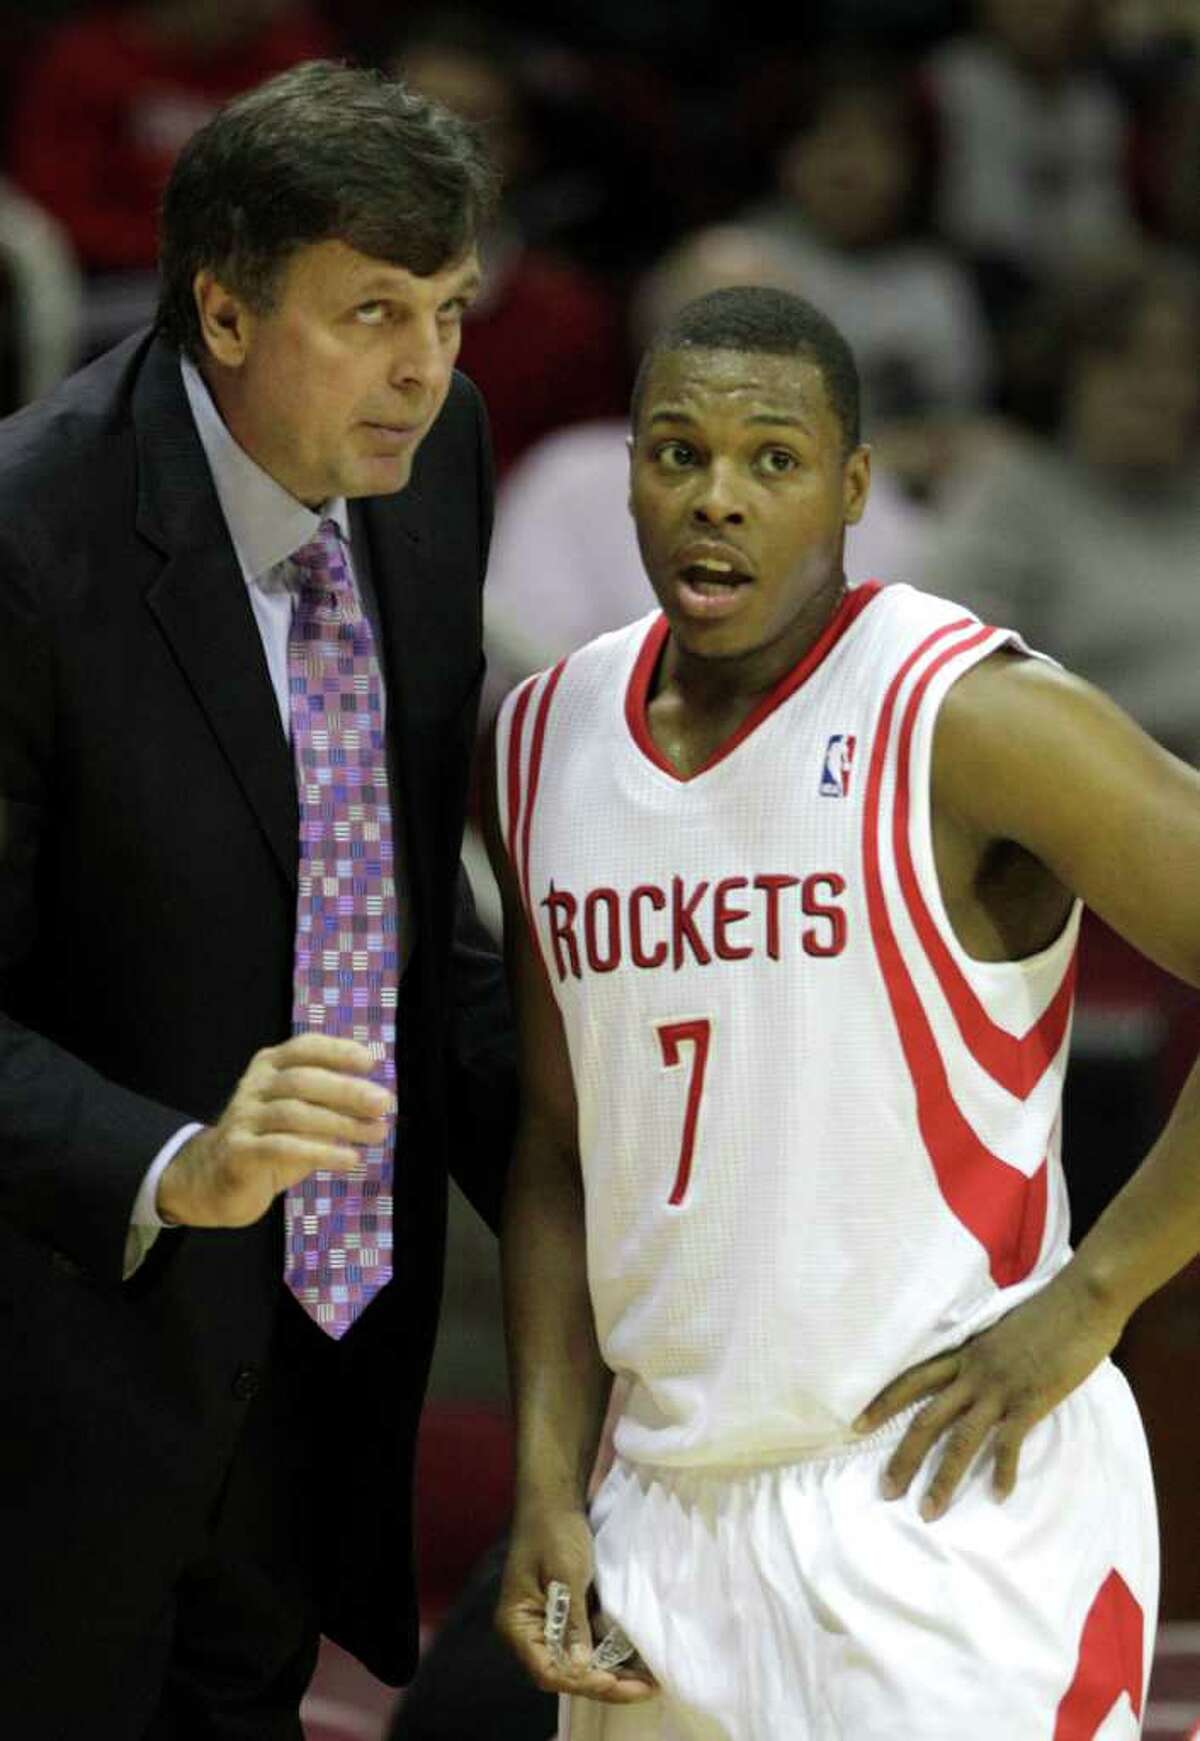 Houston Rockets head coach Kevin McHale, left, talks to Rockets point guard Kyle Lowry (7) during the first half of a pre-season NBA basketball game against the San Antonio Spurs at Toyota Center Saturday, Dec. 17, 2011, in Houston. ( Brett Coomer / Houston Chronicle )